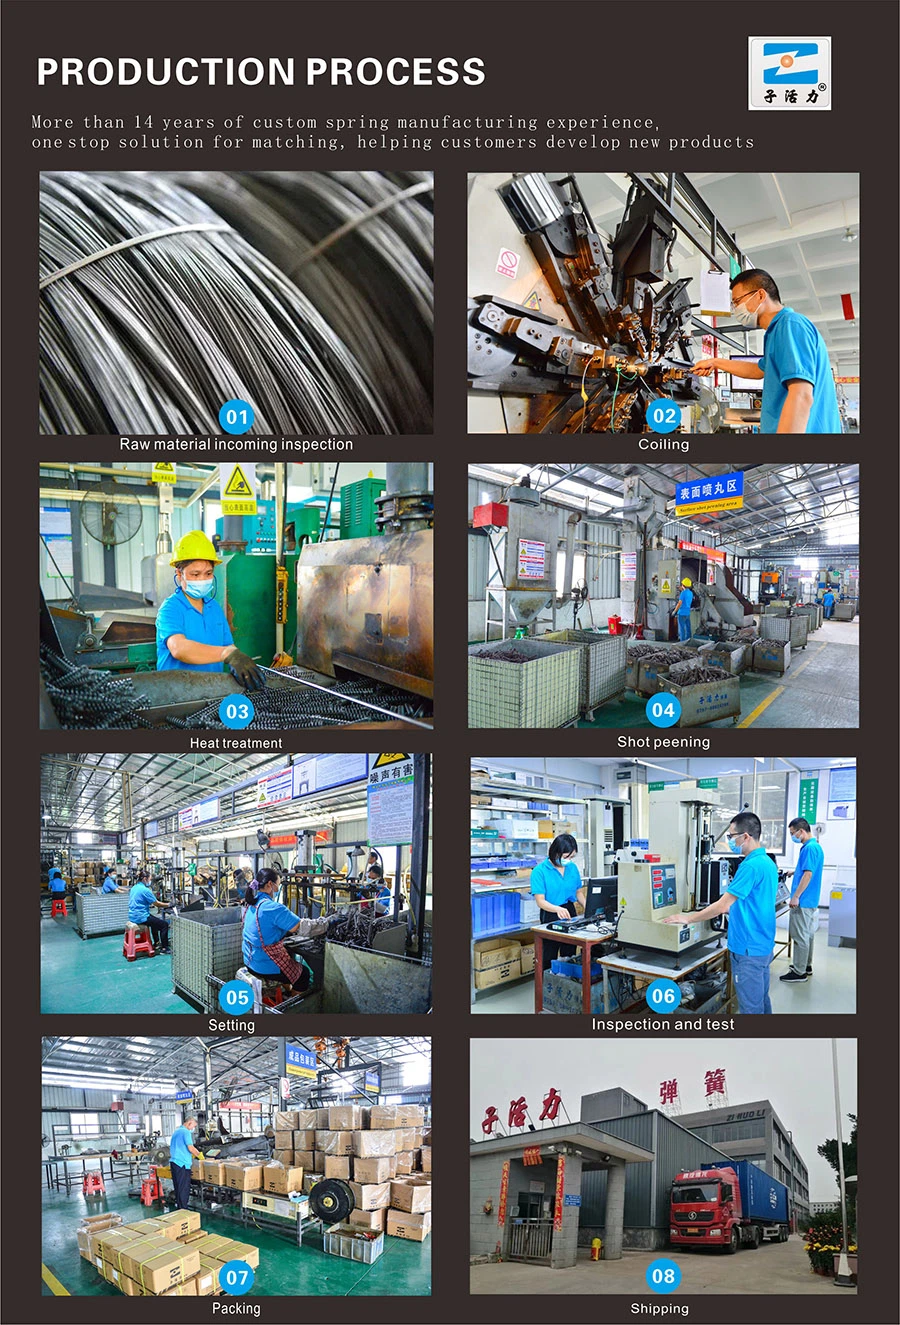 Custom Stainless Steel Coil Compression Tension Extension Torsion Steel Wire Forms Wire Forming Spring